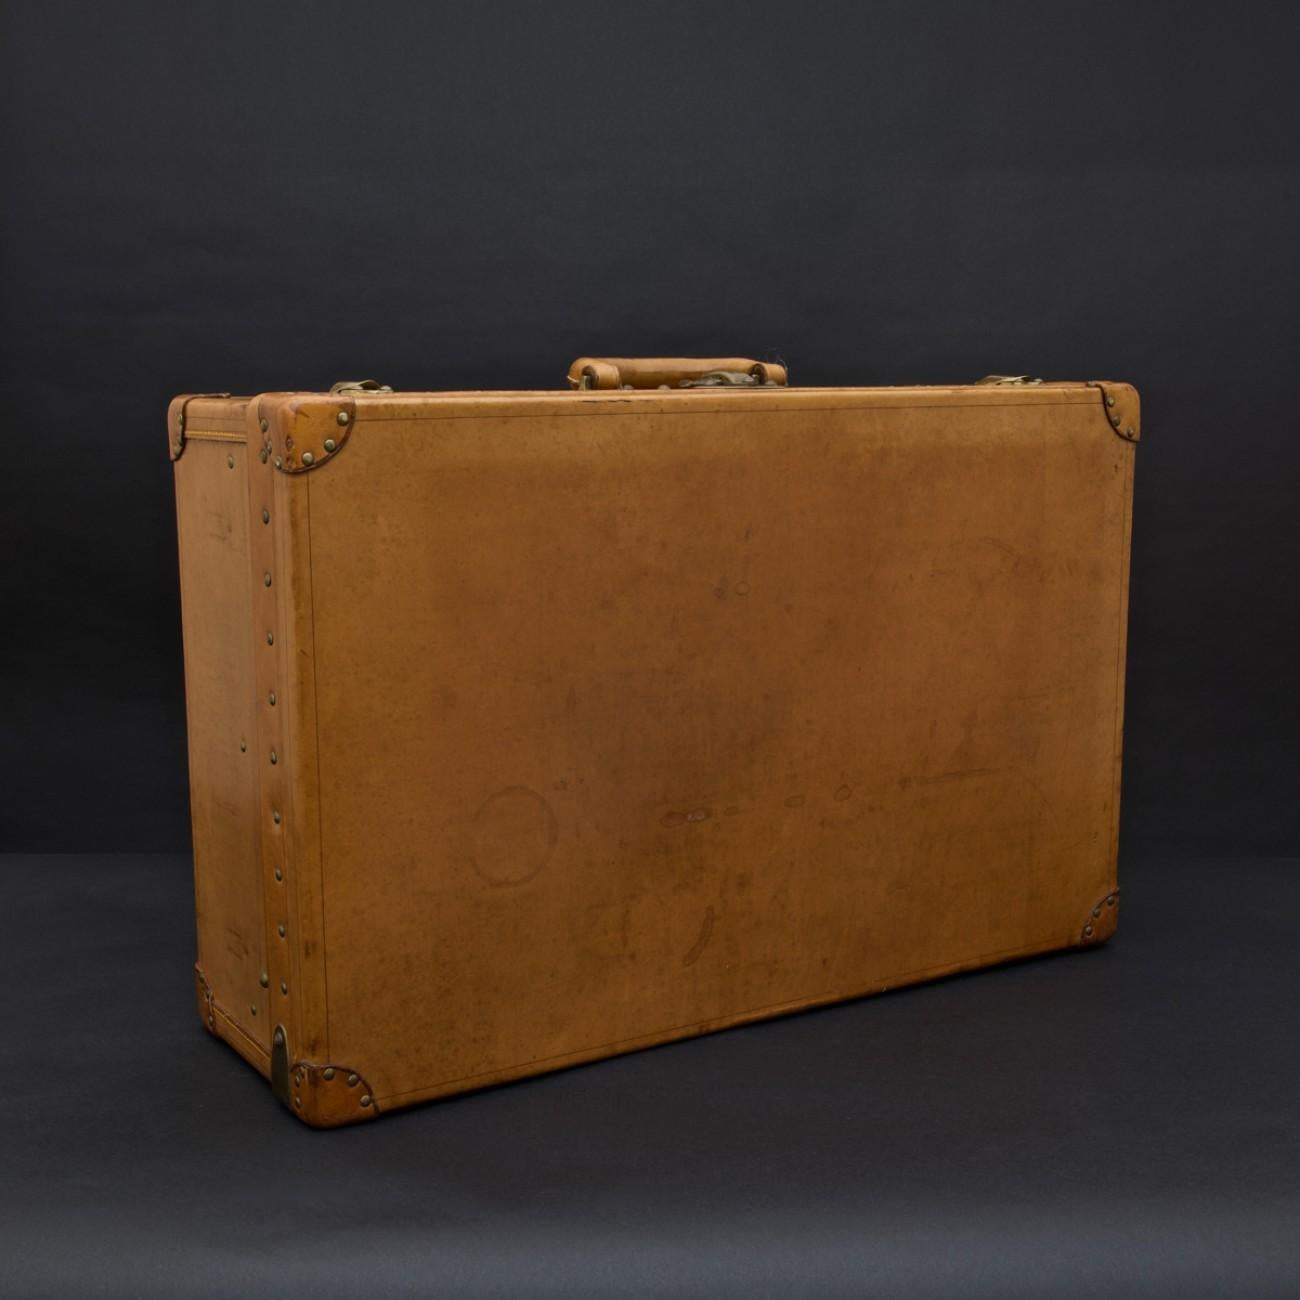 A superb 'Vache Naturelle' suitcase by Louis Vuitton. With original cotton lined interior (missing tray), circa 1935.

Louis Vuitton was founded by its namesake in 1854, with the first shop on Rue Neuve des Capucines in Paris, France. Monsieur